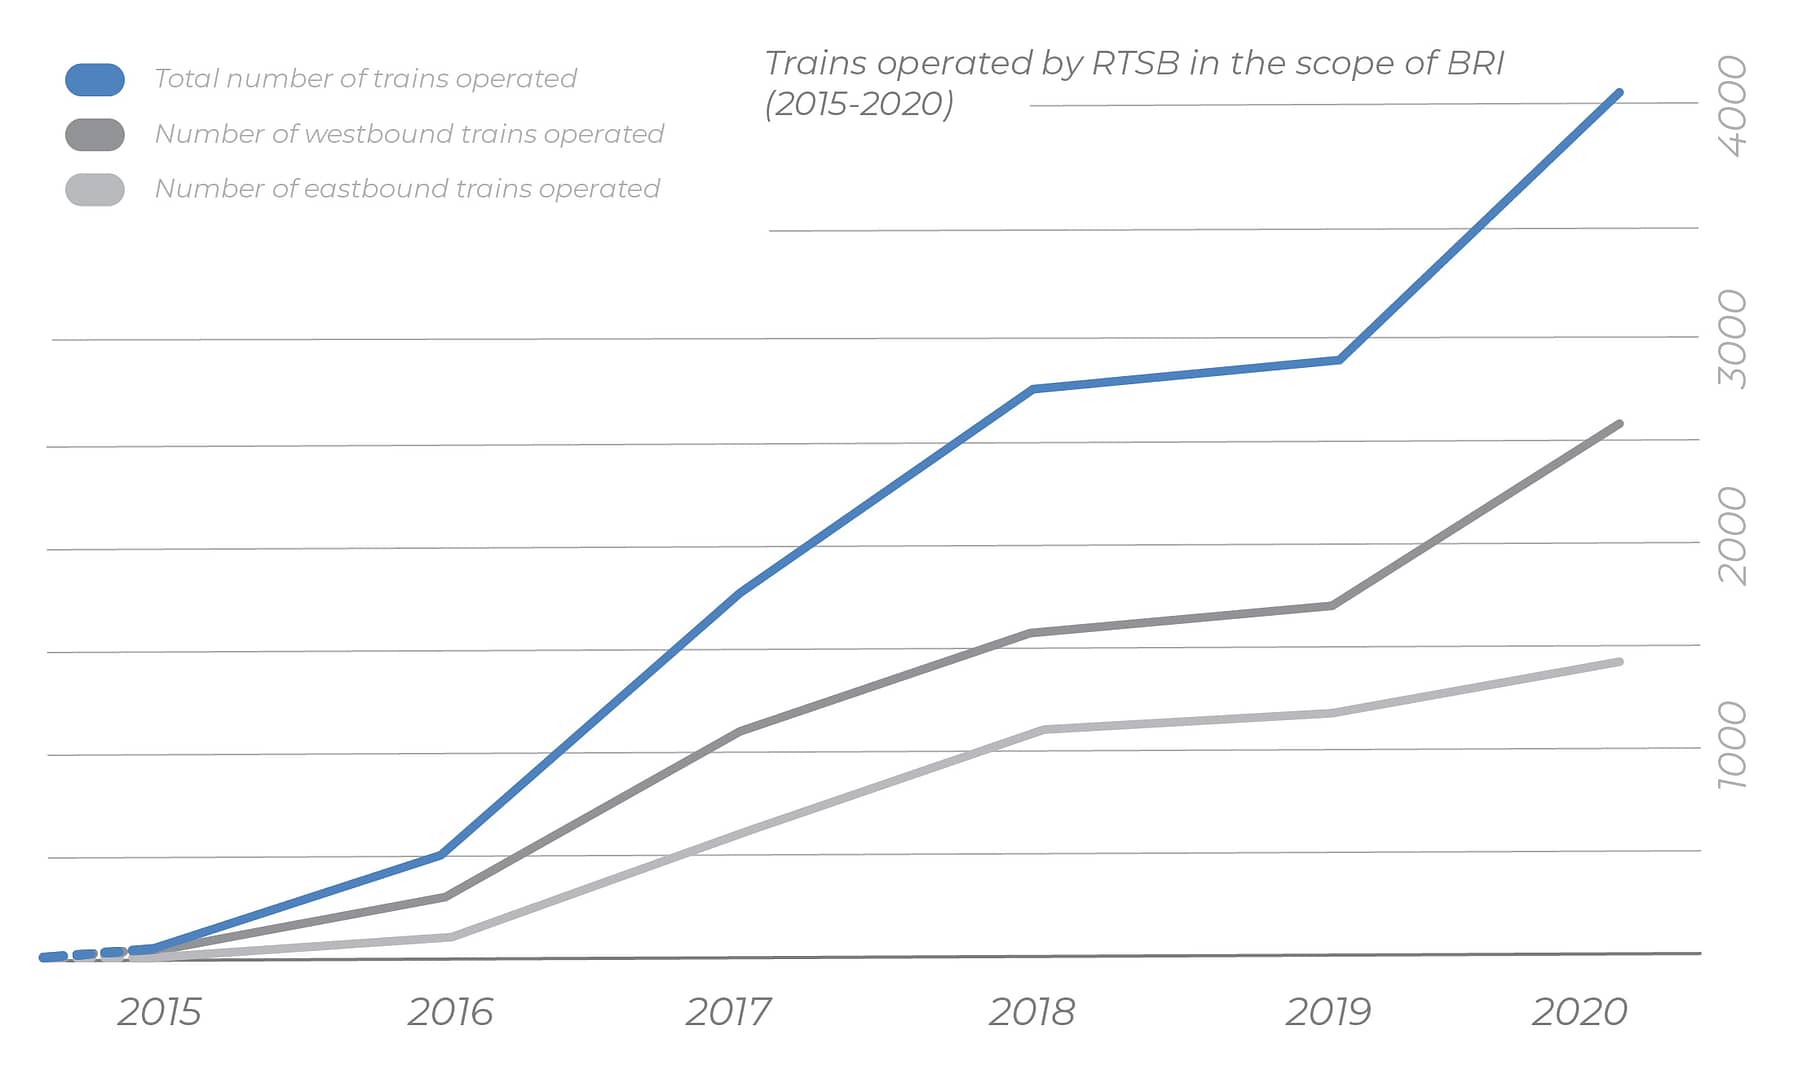 Graph showing growing numbers of trains operated by RTSB from 2015 to 2019